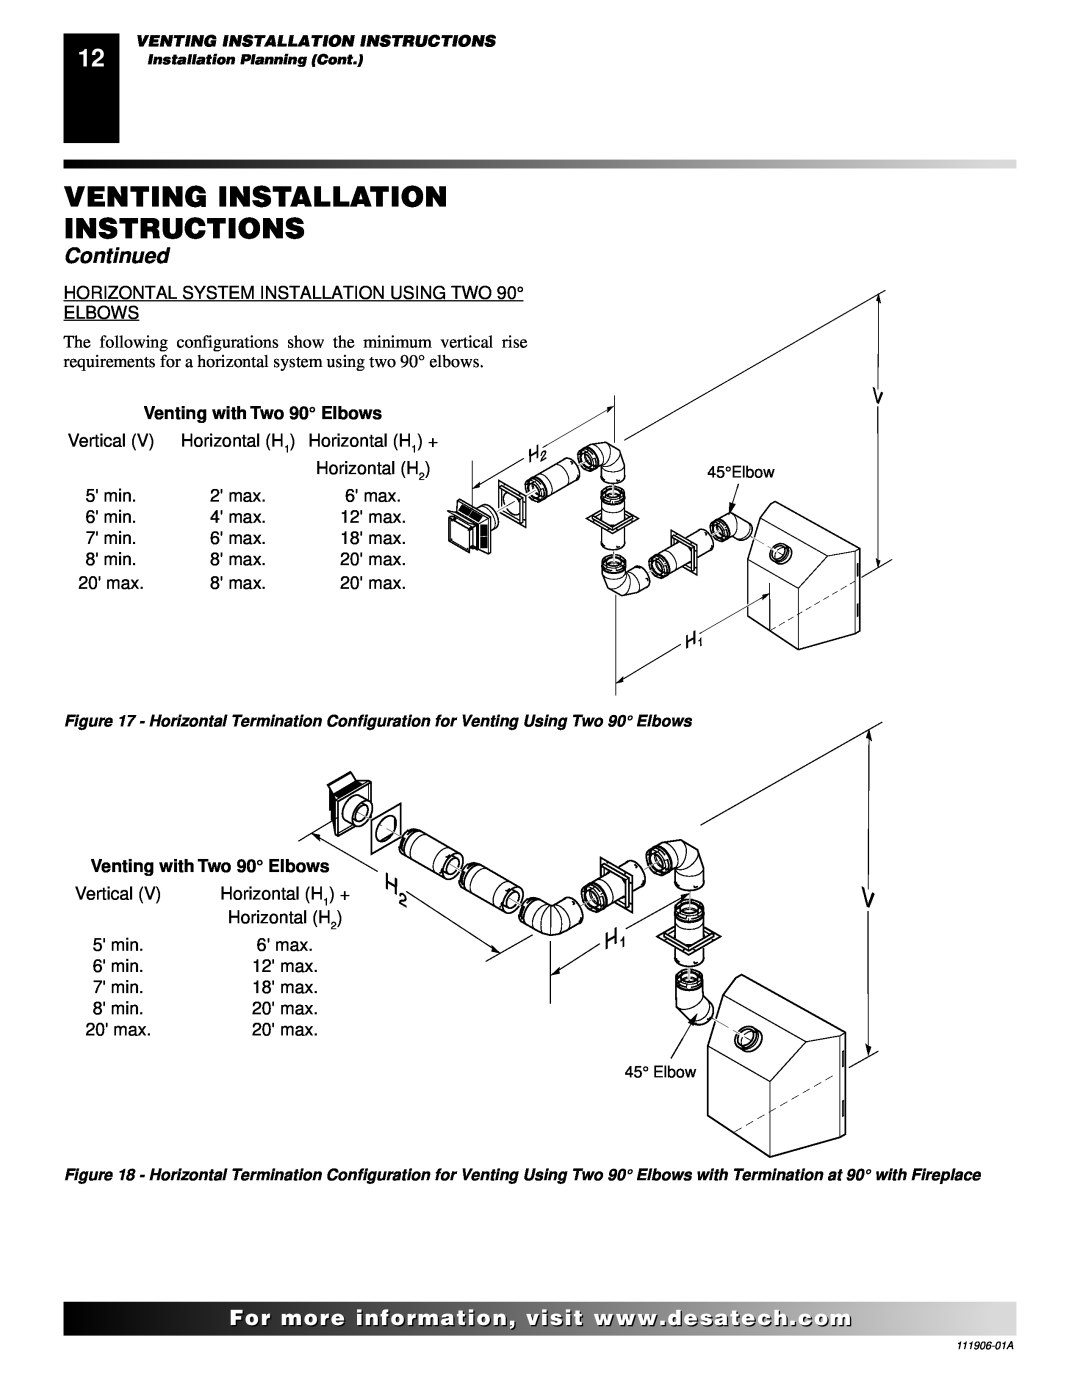 Desa (V)V42NA(1) installation manual Venting Installation Instructions, Continued, Venting with Two 90 Elbows 